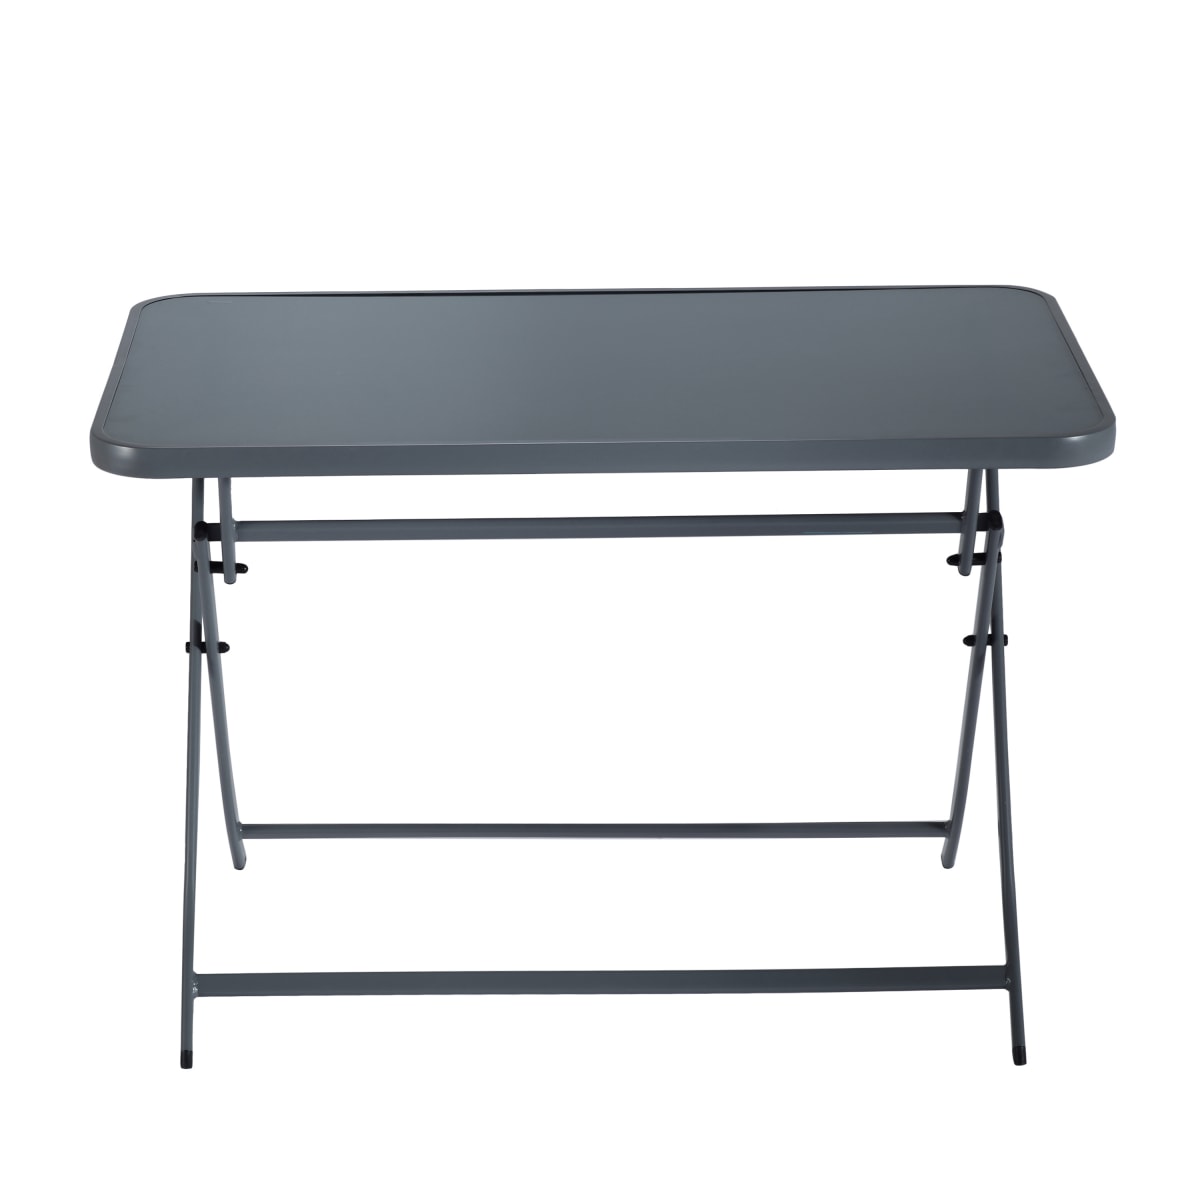 EMYS NATERAL - Folding Table - 4 seater - rectangular steel top glass - 70x110xh72